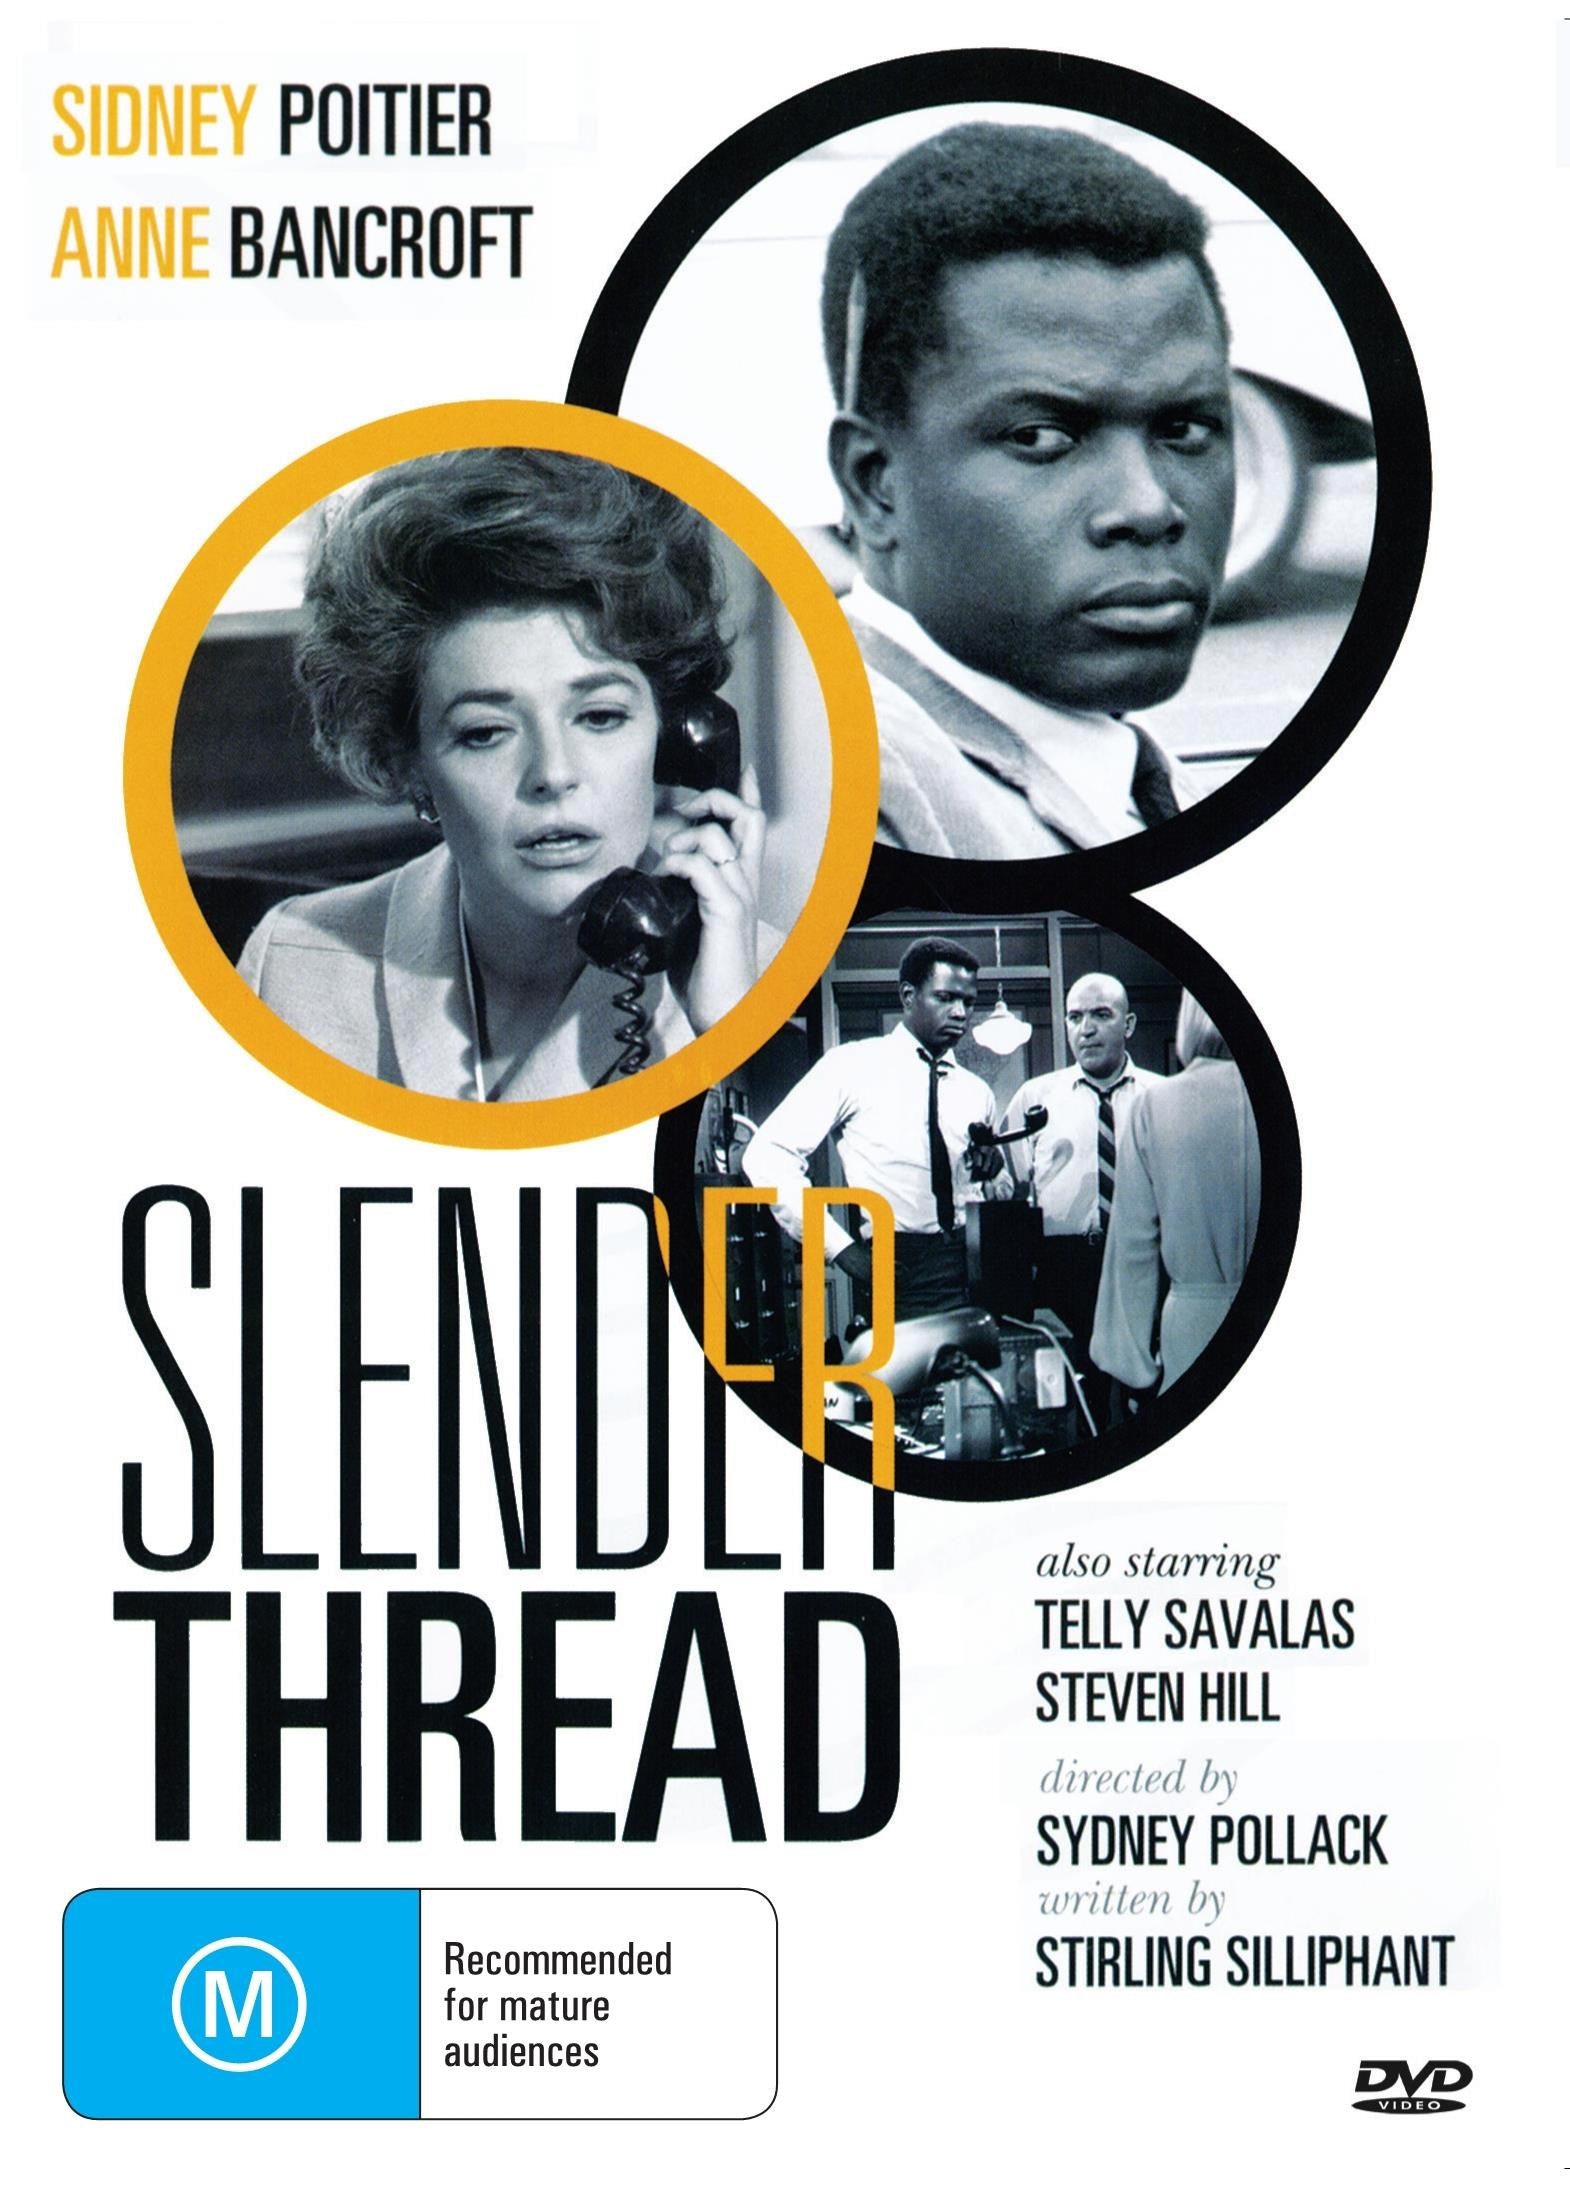 The Slender Thread rareandcollectibledvds